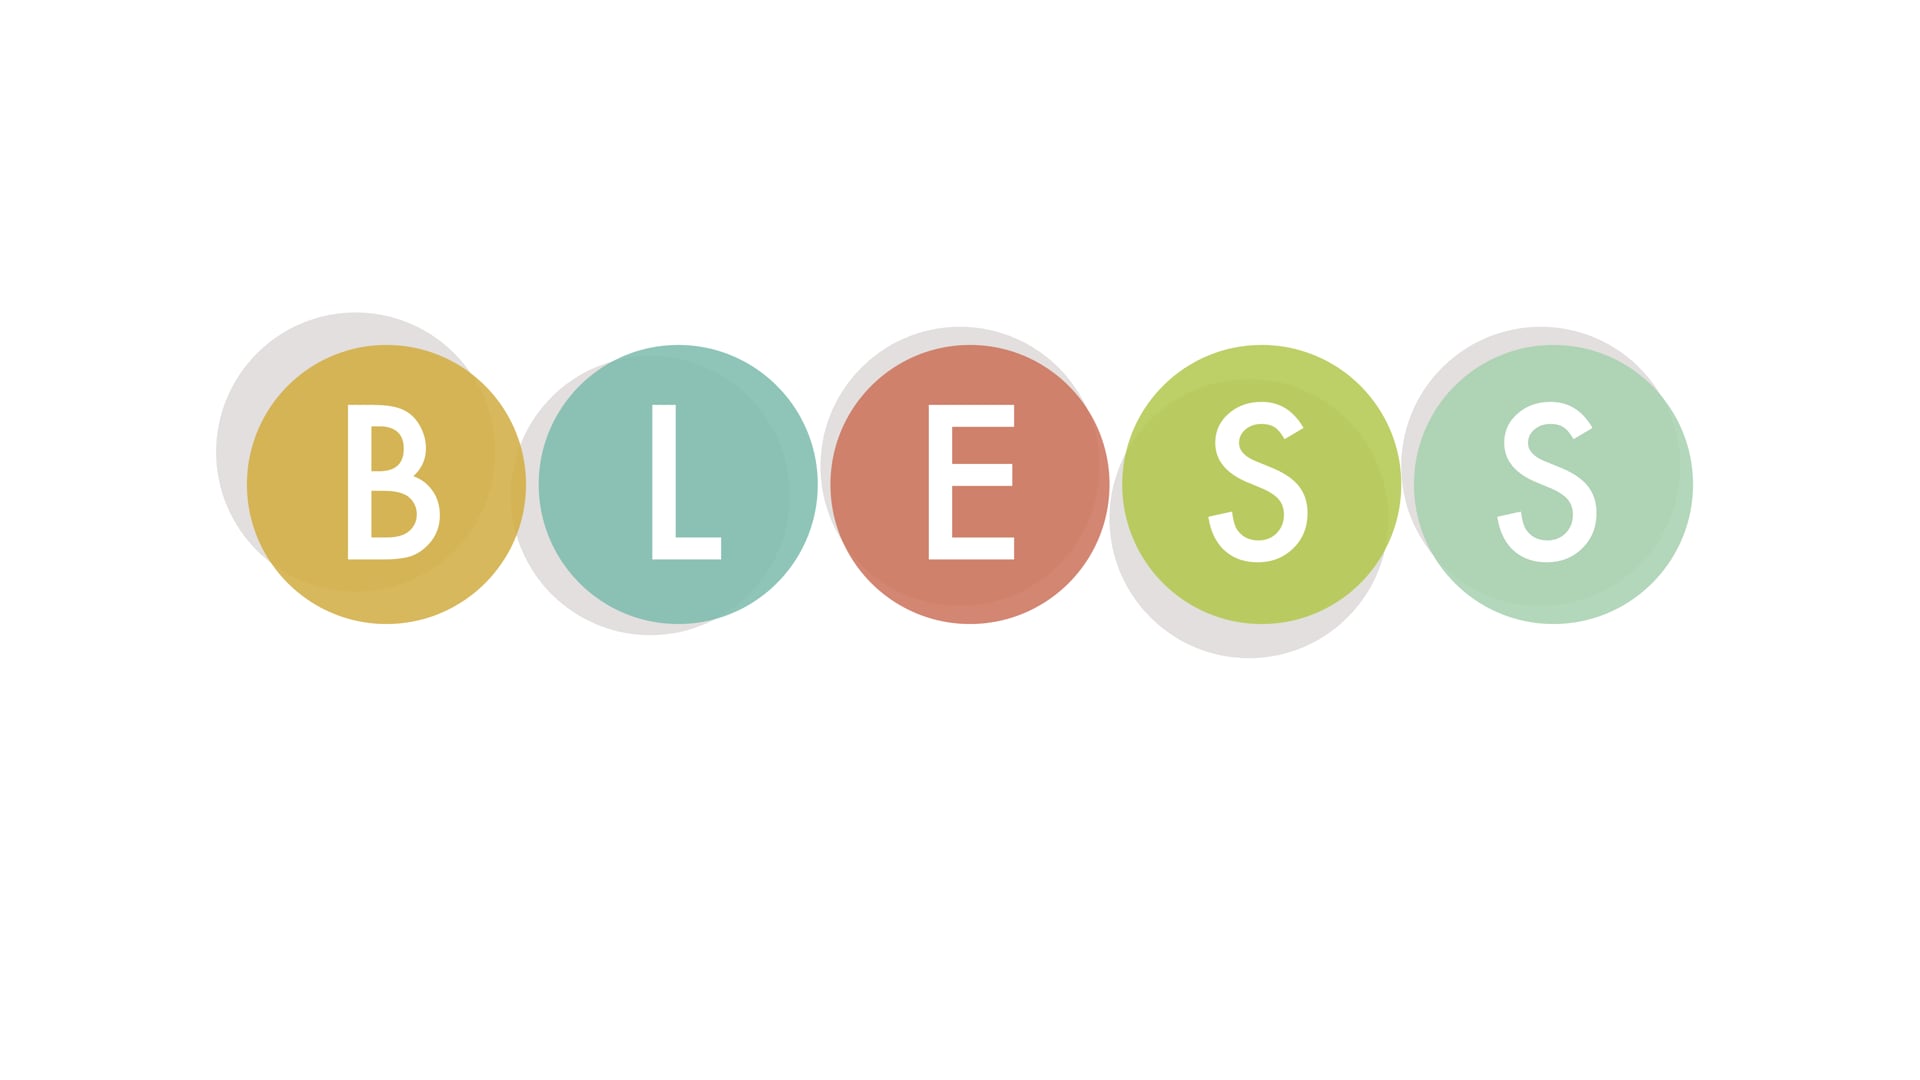 BLESS: Share Your Story | April 3, 2022